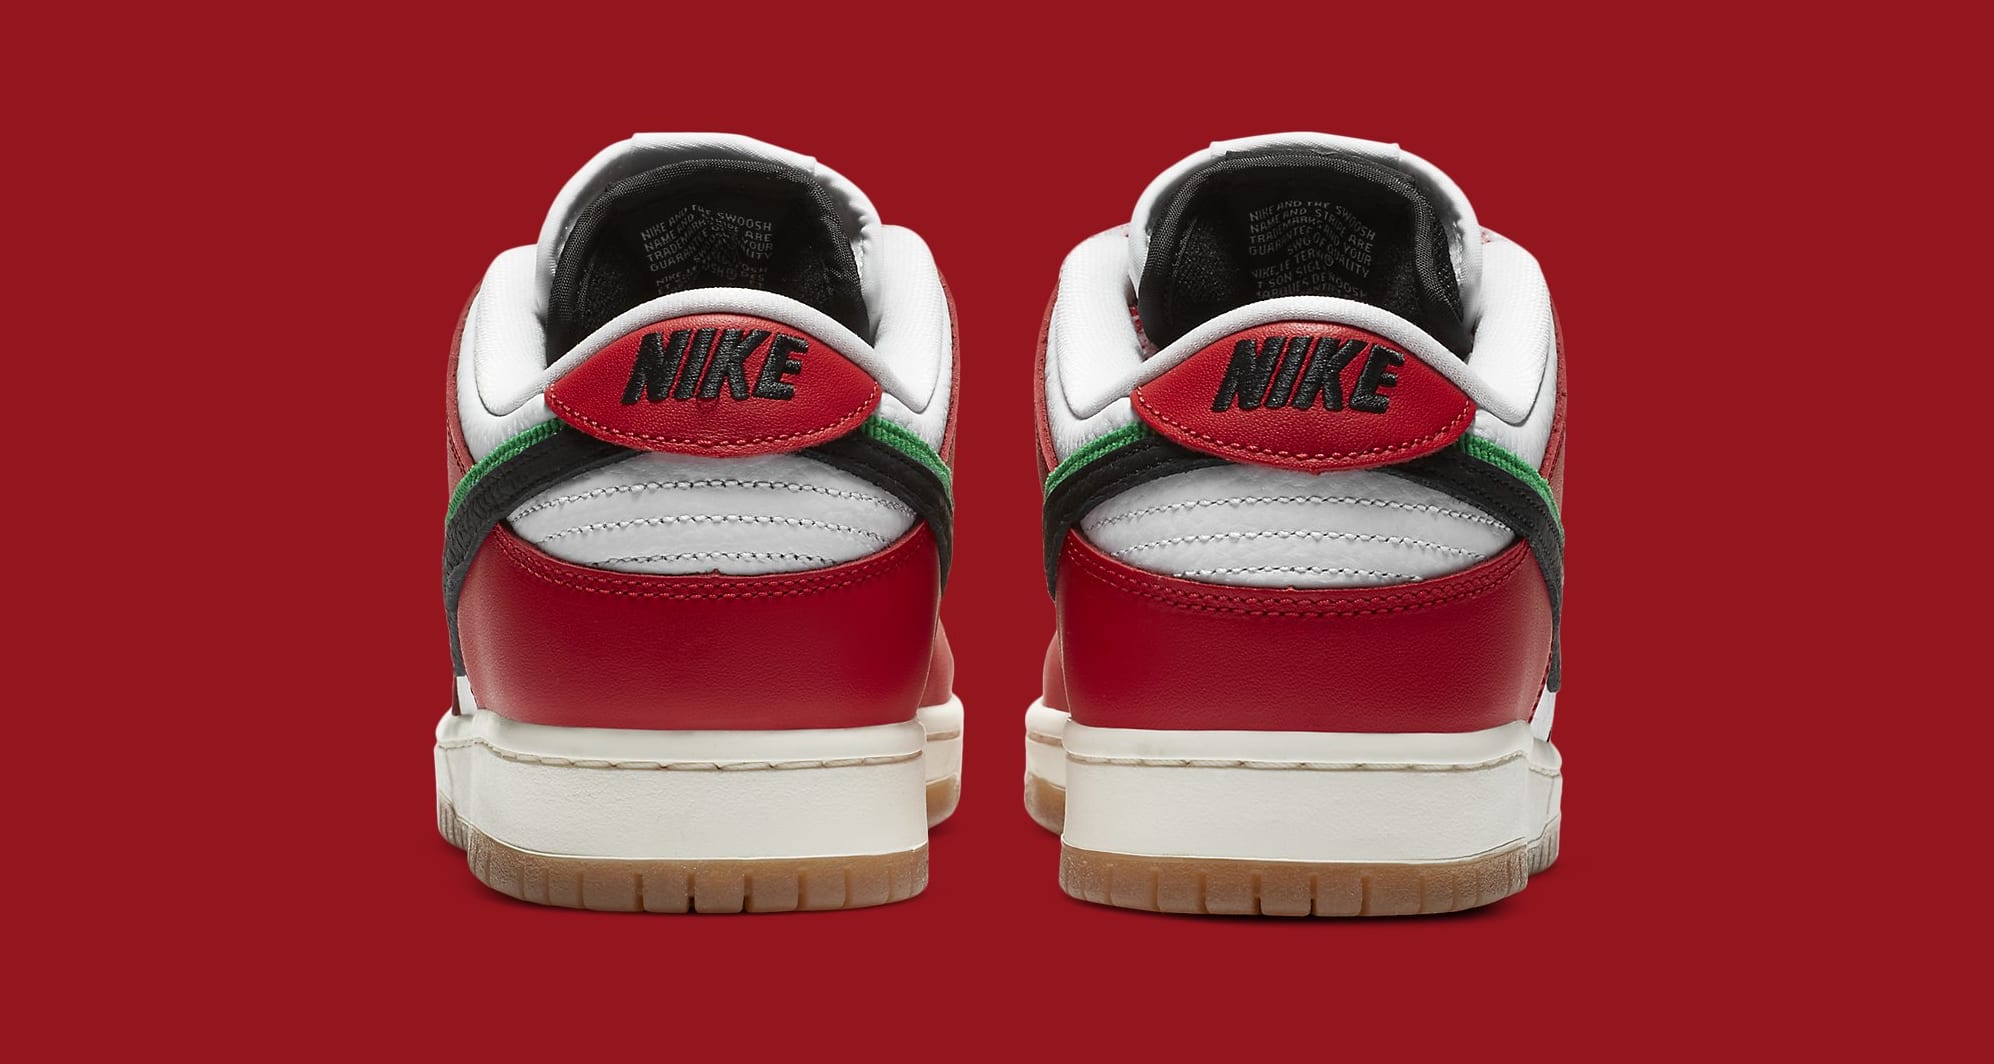 Frame Skate x Nike SB Dunk Low Release Date CT2550-600 | Sole Collector